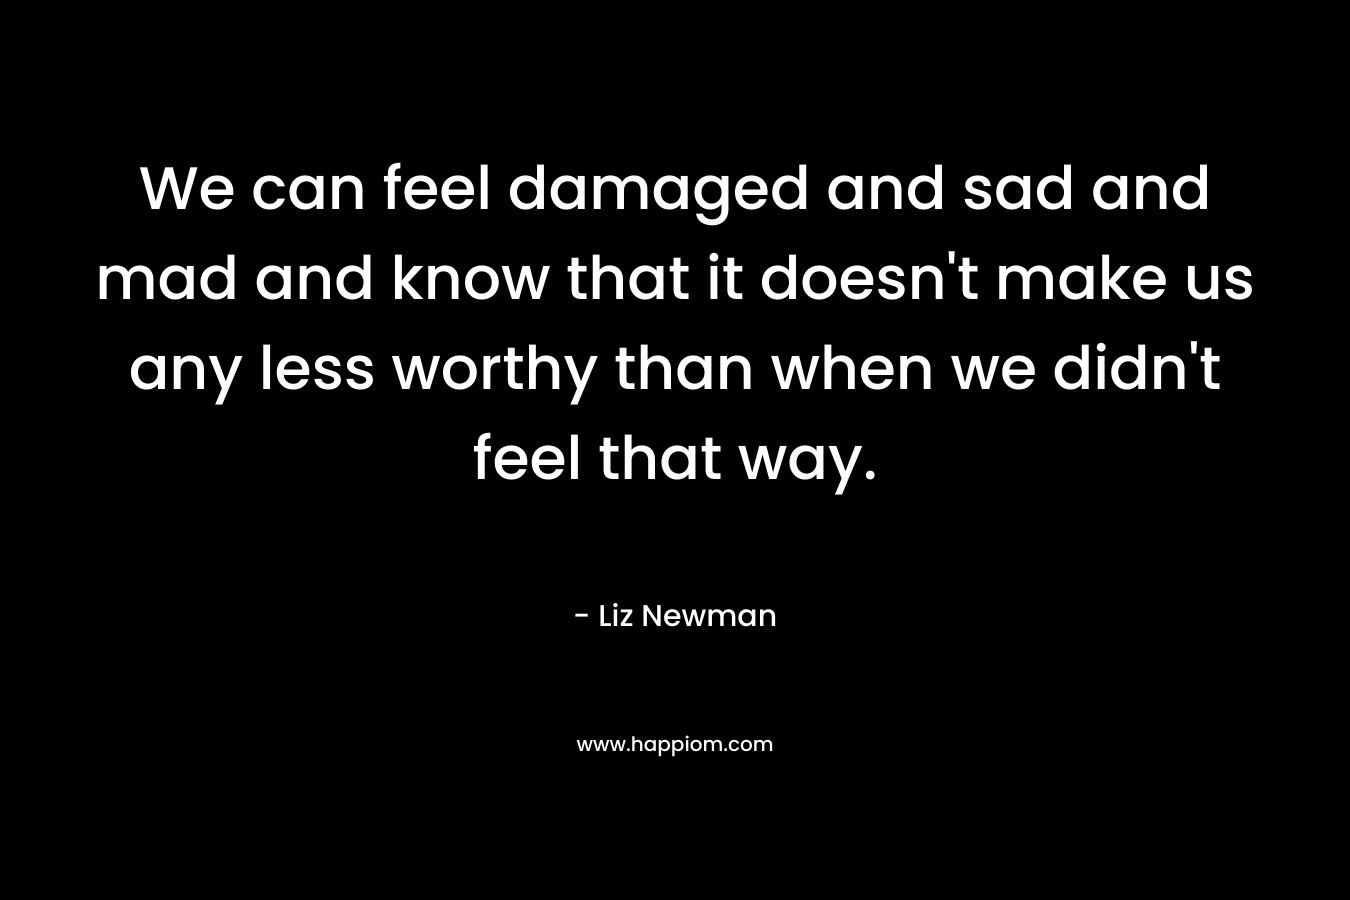 We can feel damaged and sad and mad and know that it doesn't make us any less worthy than when we didn't feel that way.